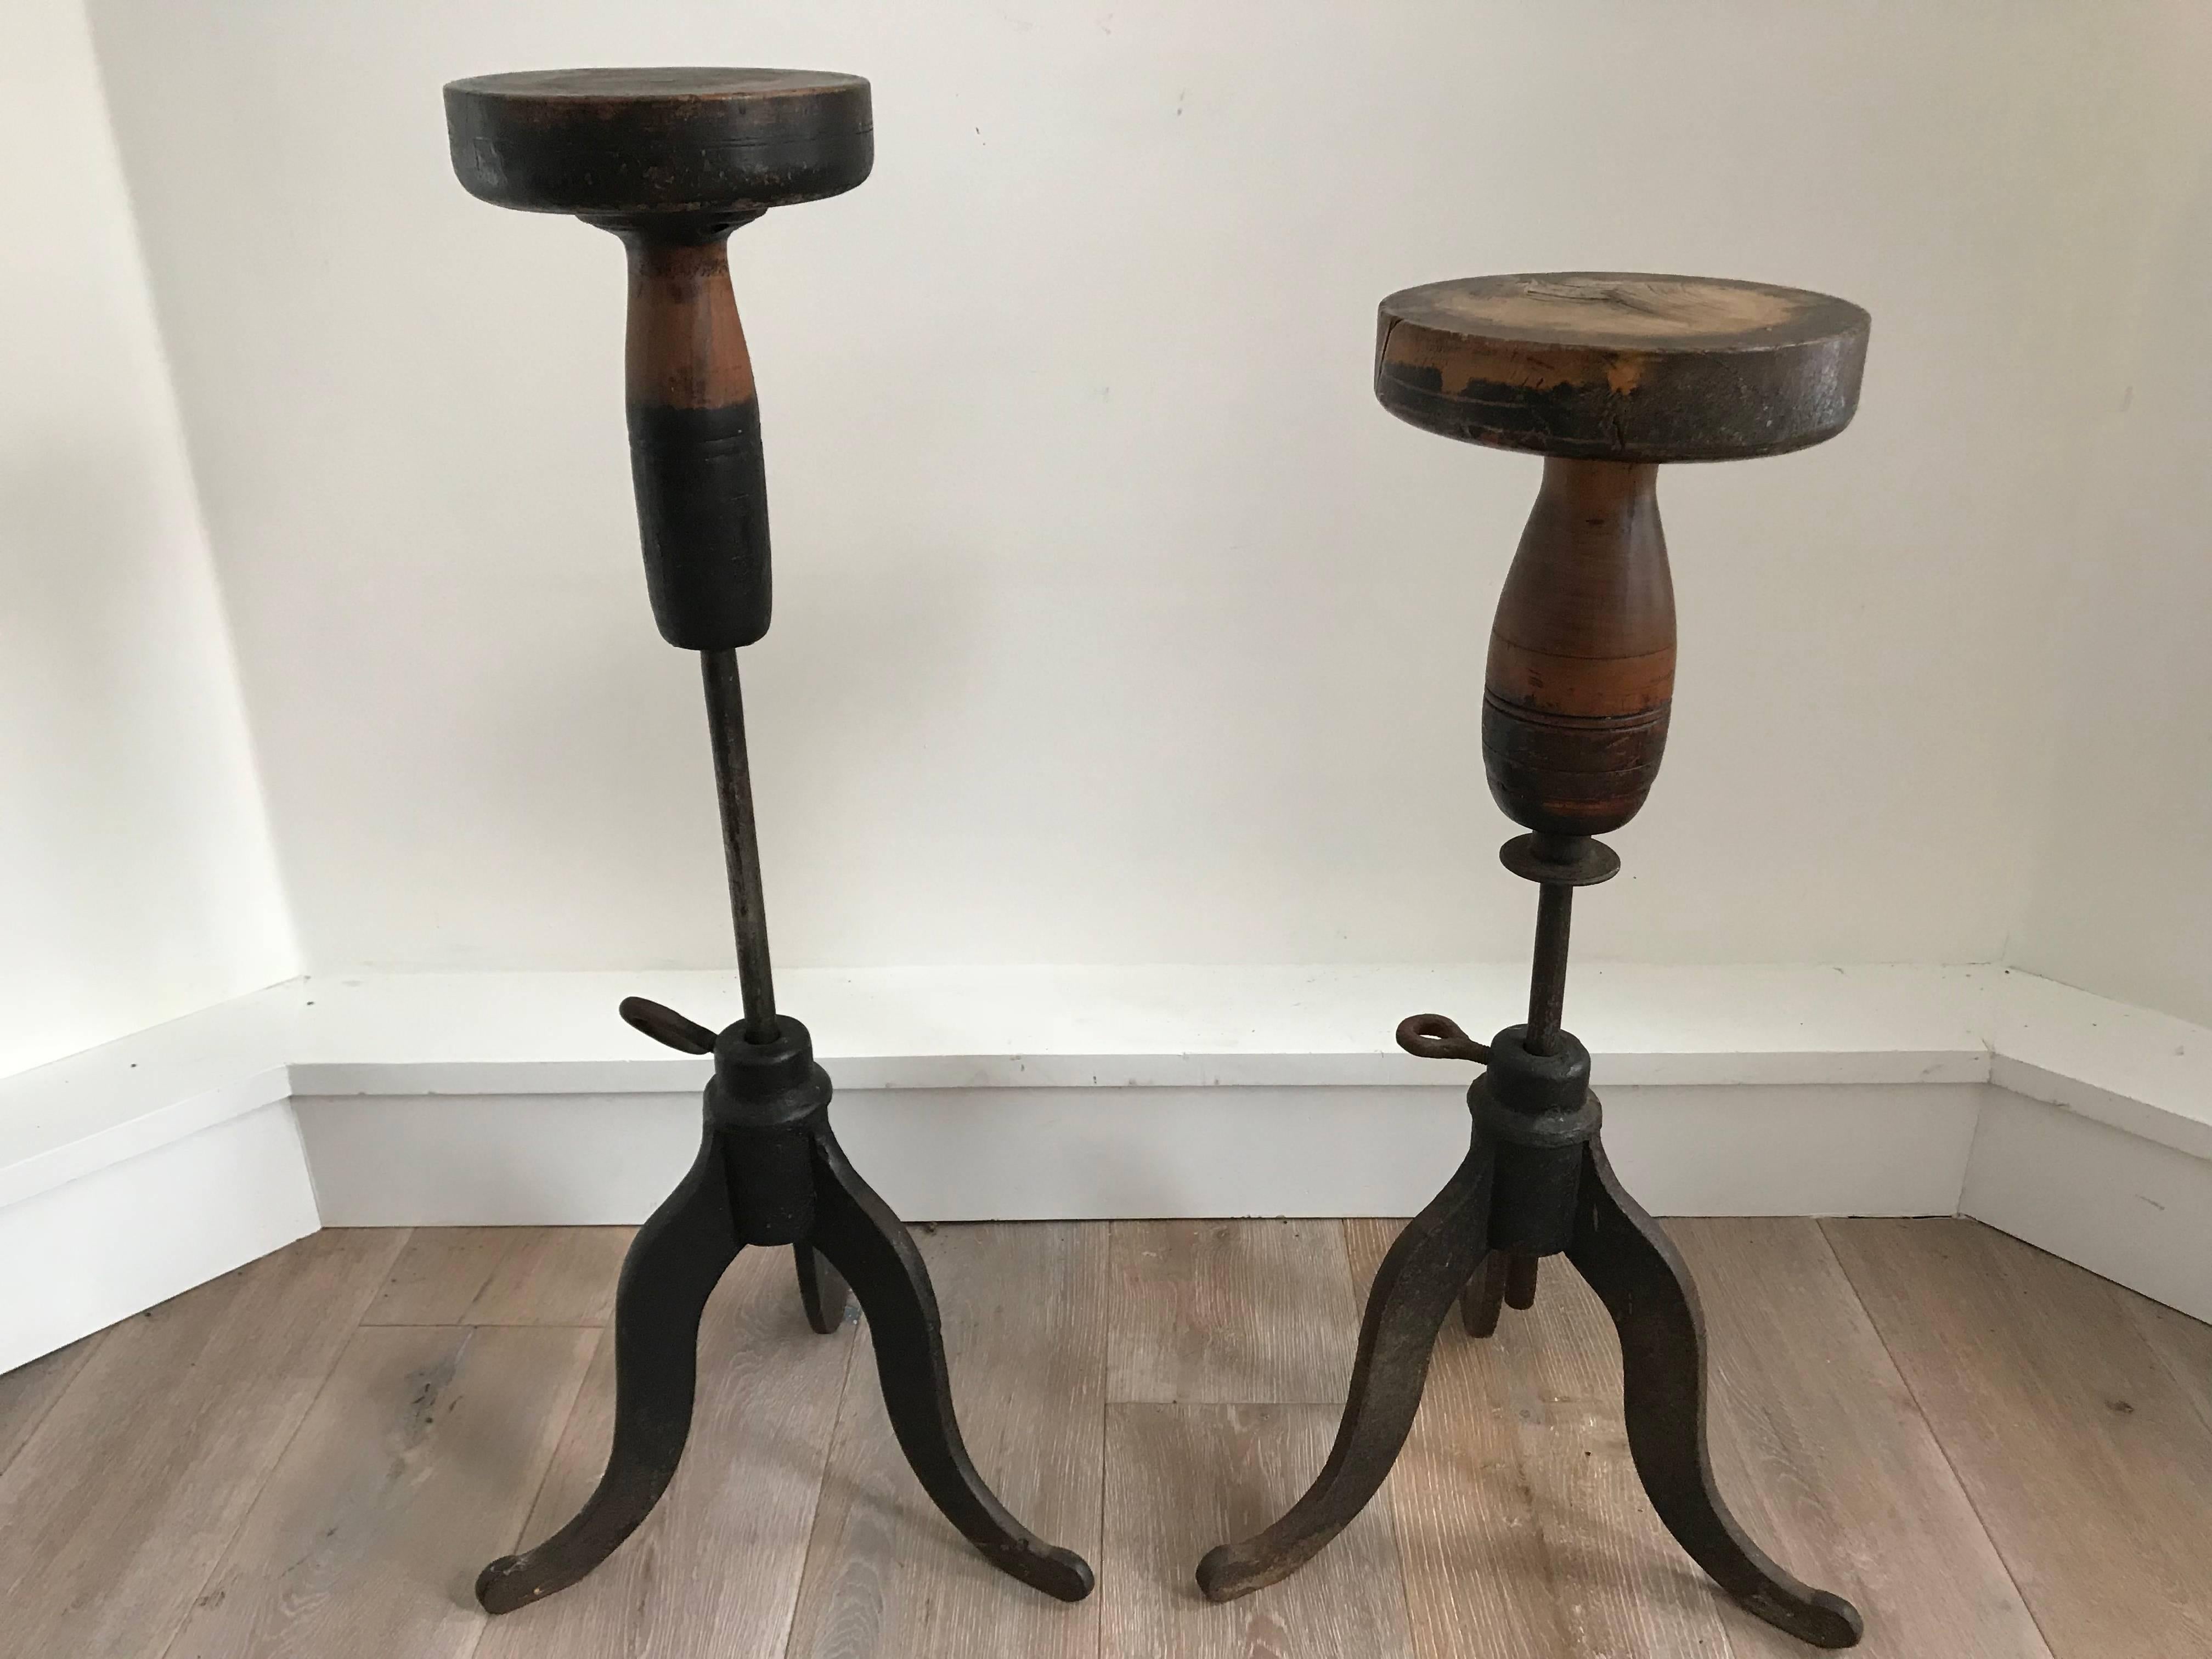 Wonderful antique sculptors stands or pedestal. Revolving wood top on adjustable forged iron base. Great for use as a pedestal to display art. Two available. As shown the largest measures 34.5